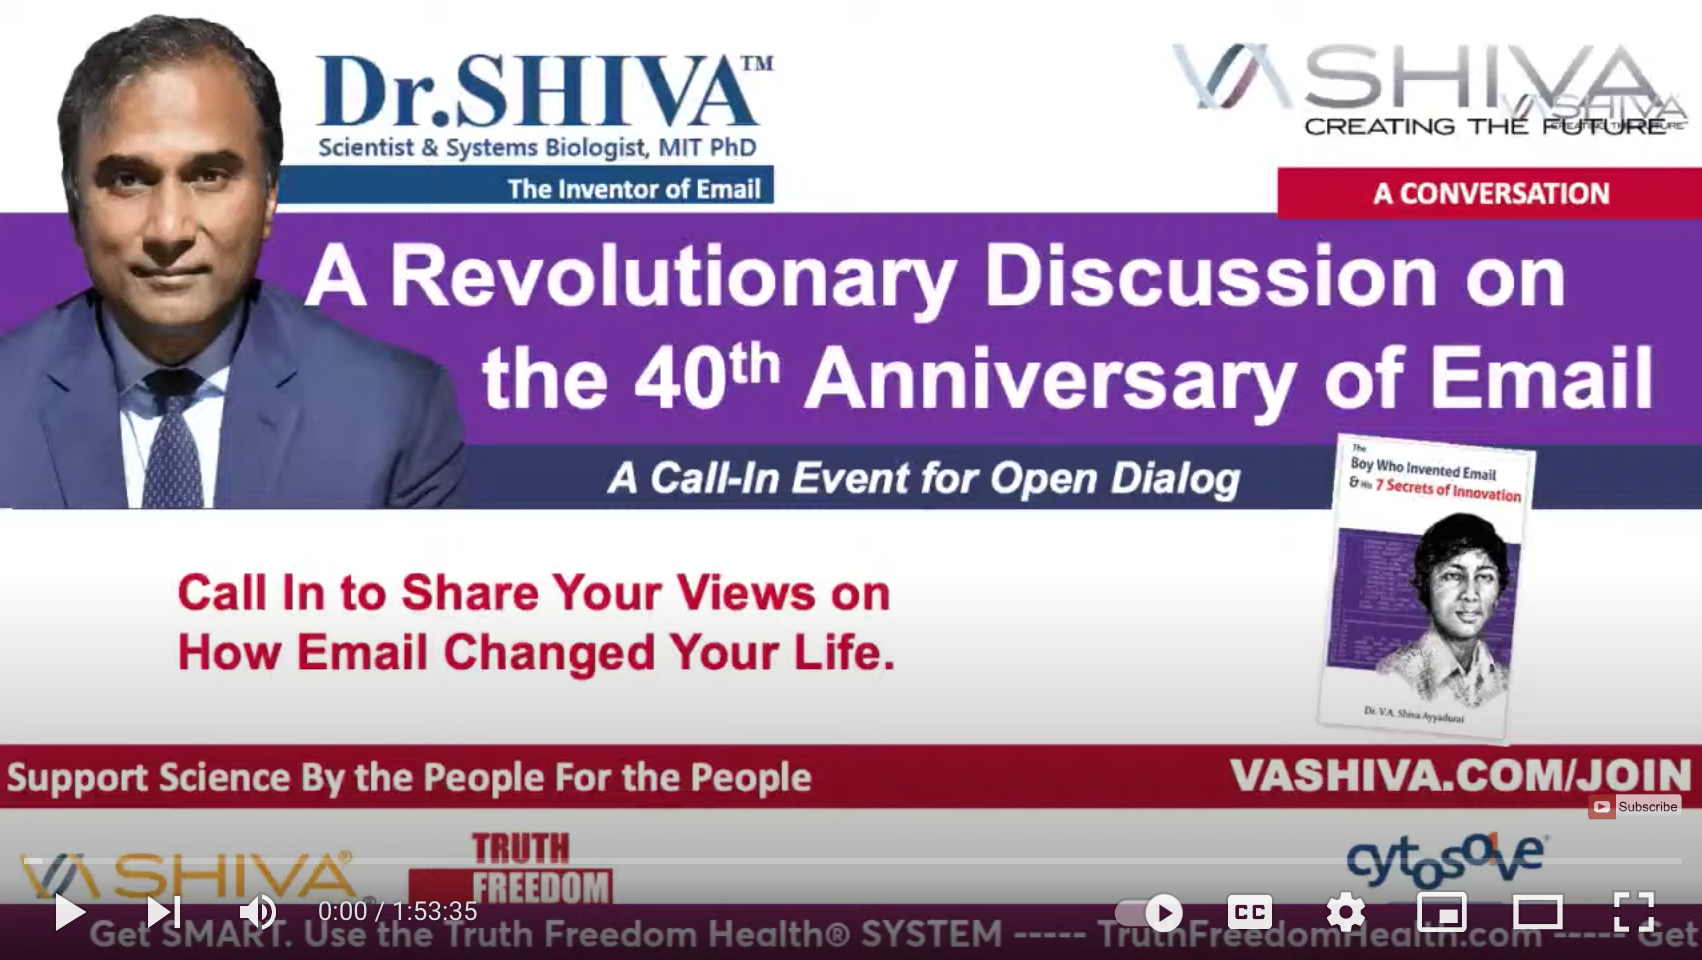 Dr.SHIVA LIVE: A Revolutionary Discussion on the 40th Anniversary of Email. Call-In.